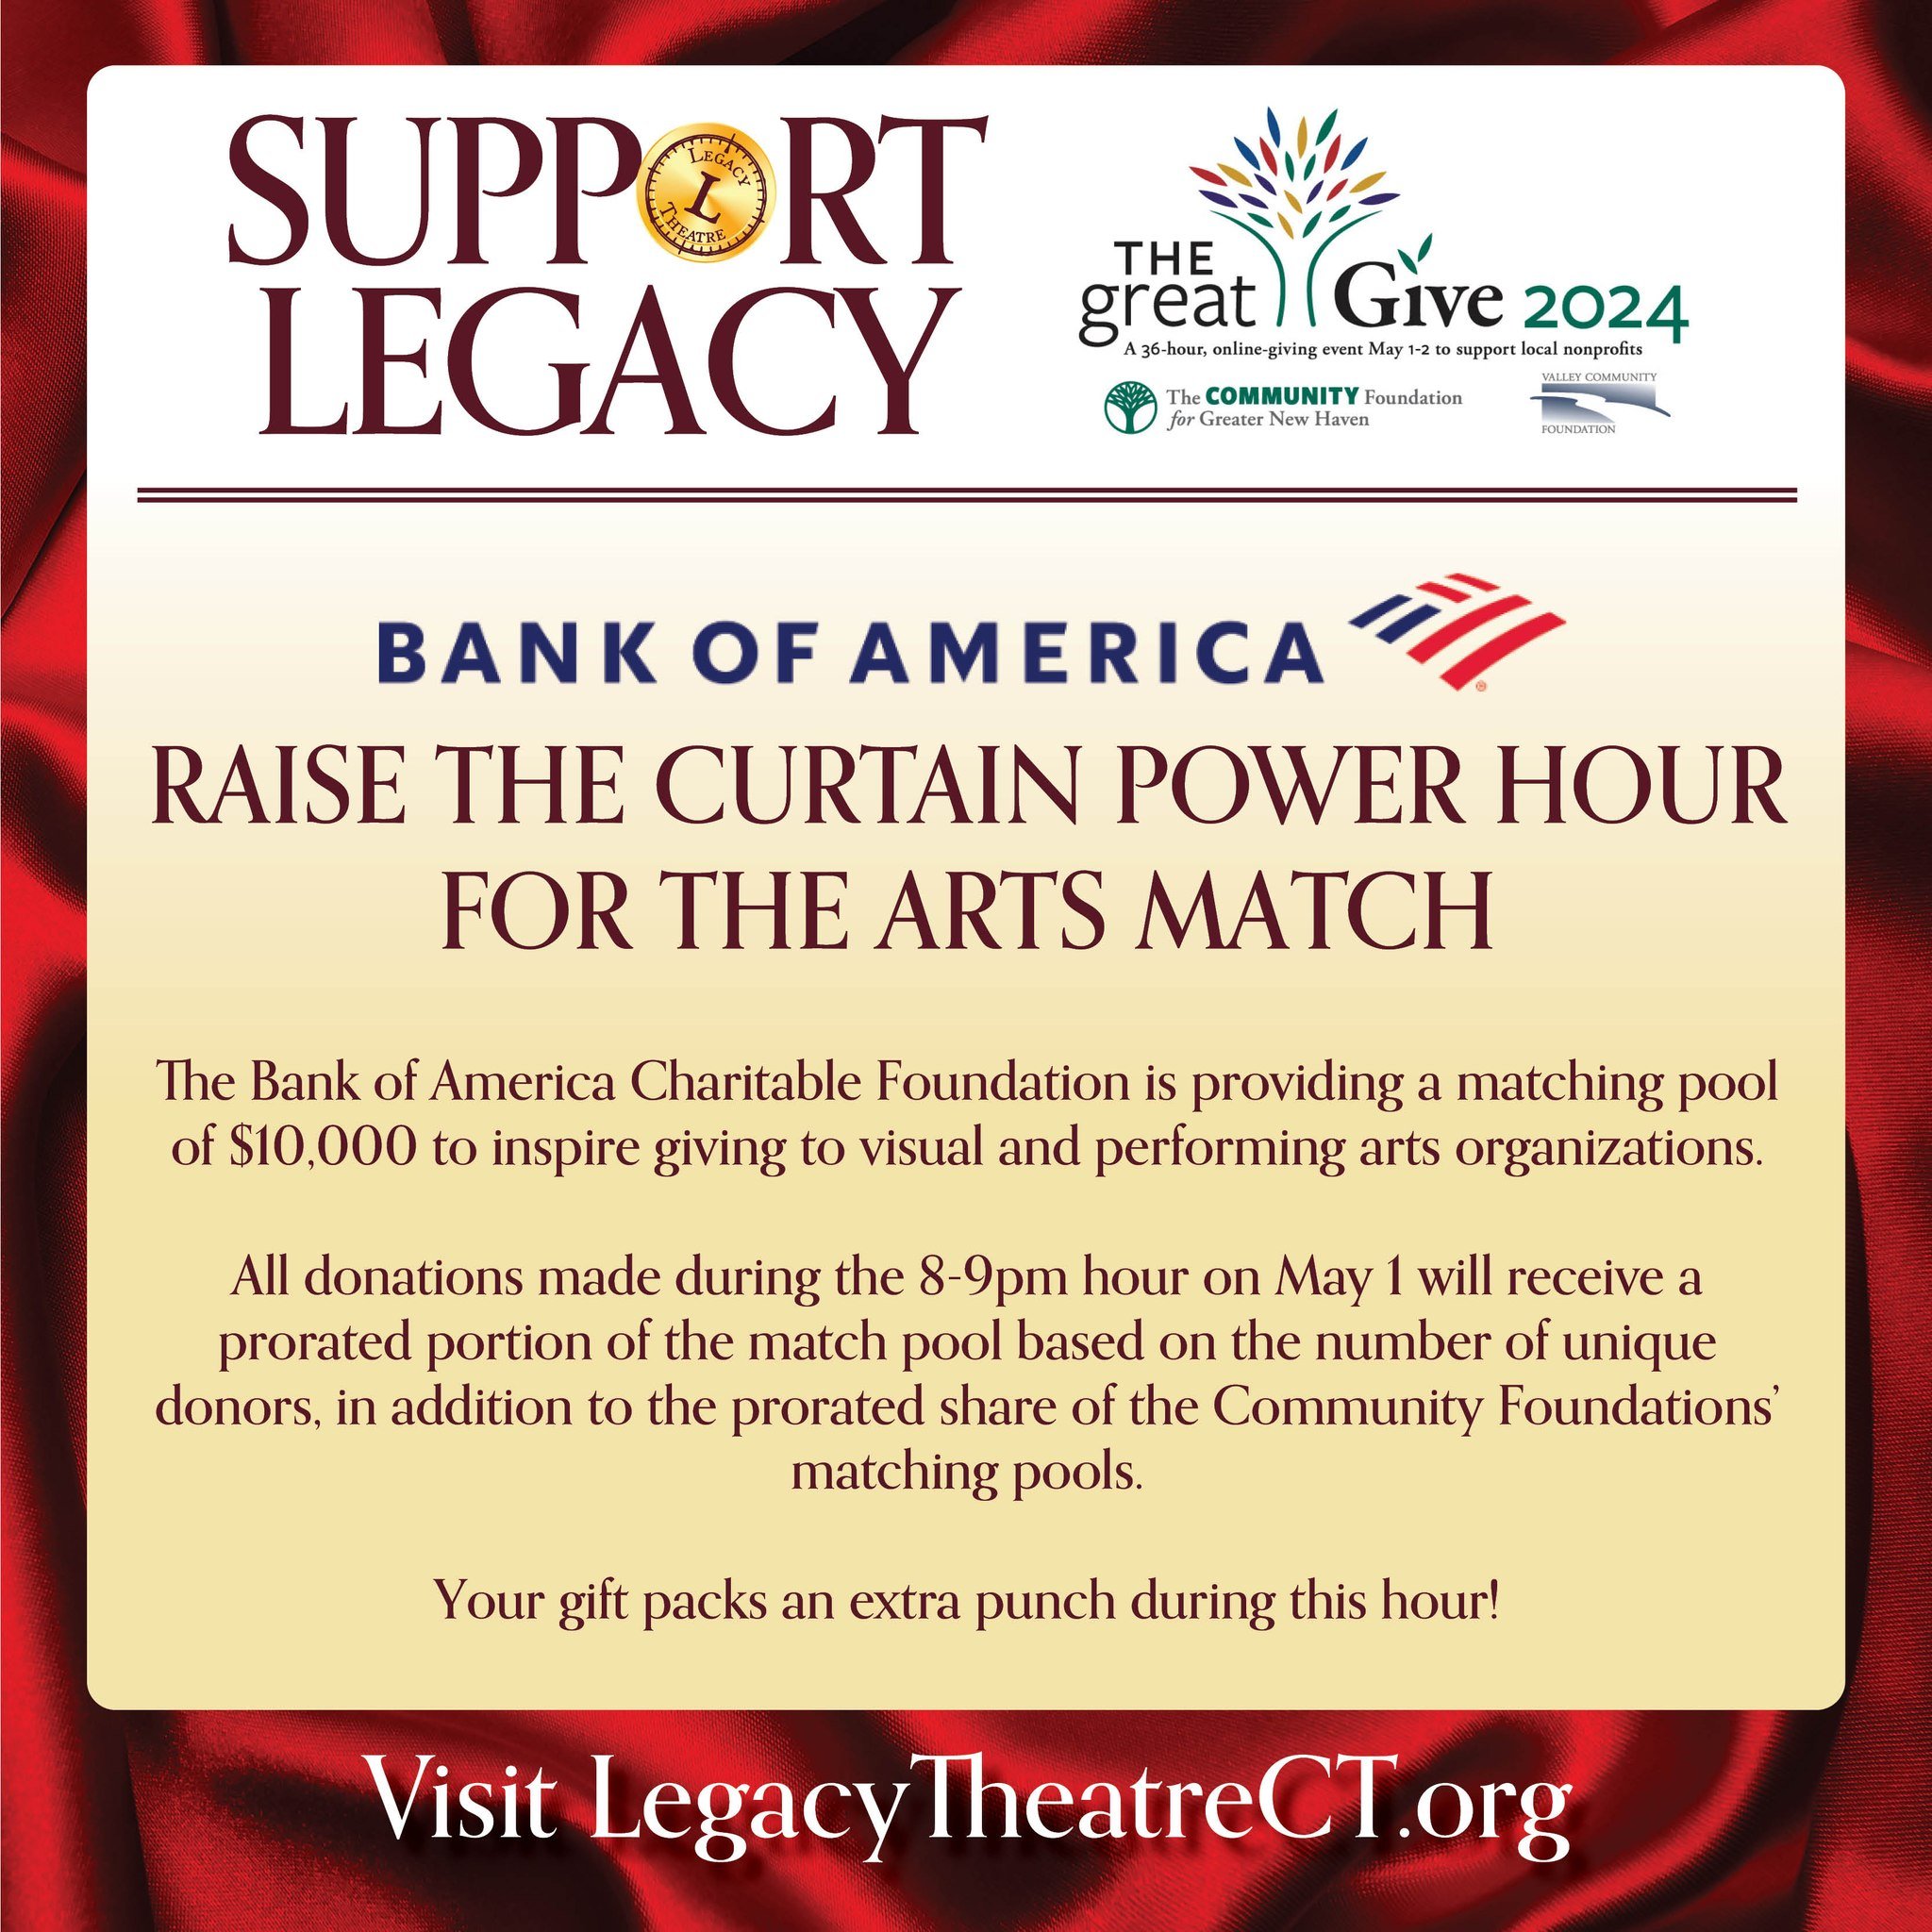 Haven&rsquo;t had a chance to donate to Legacy Theatre during the Great Give? The Raise the Curtain Power Hour for the Arts Match is happening now! From 8-9pm, Legacy will receive a prorated portion of a match pool based on the number of unique donor